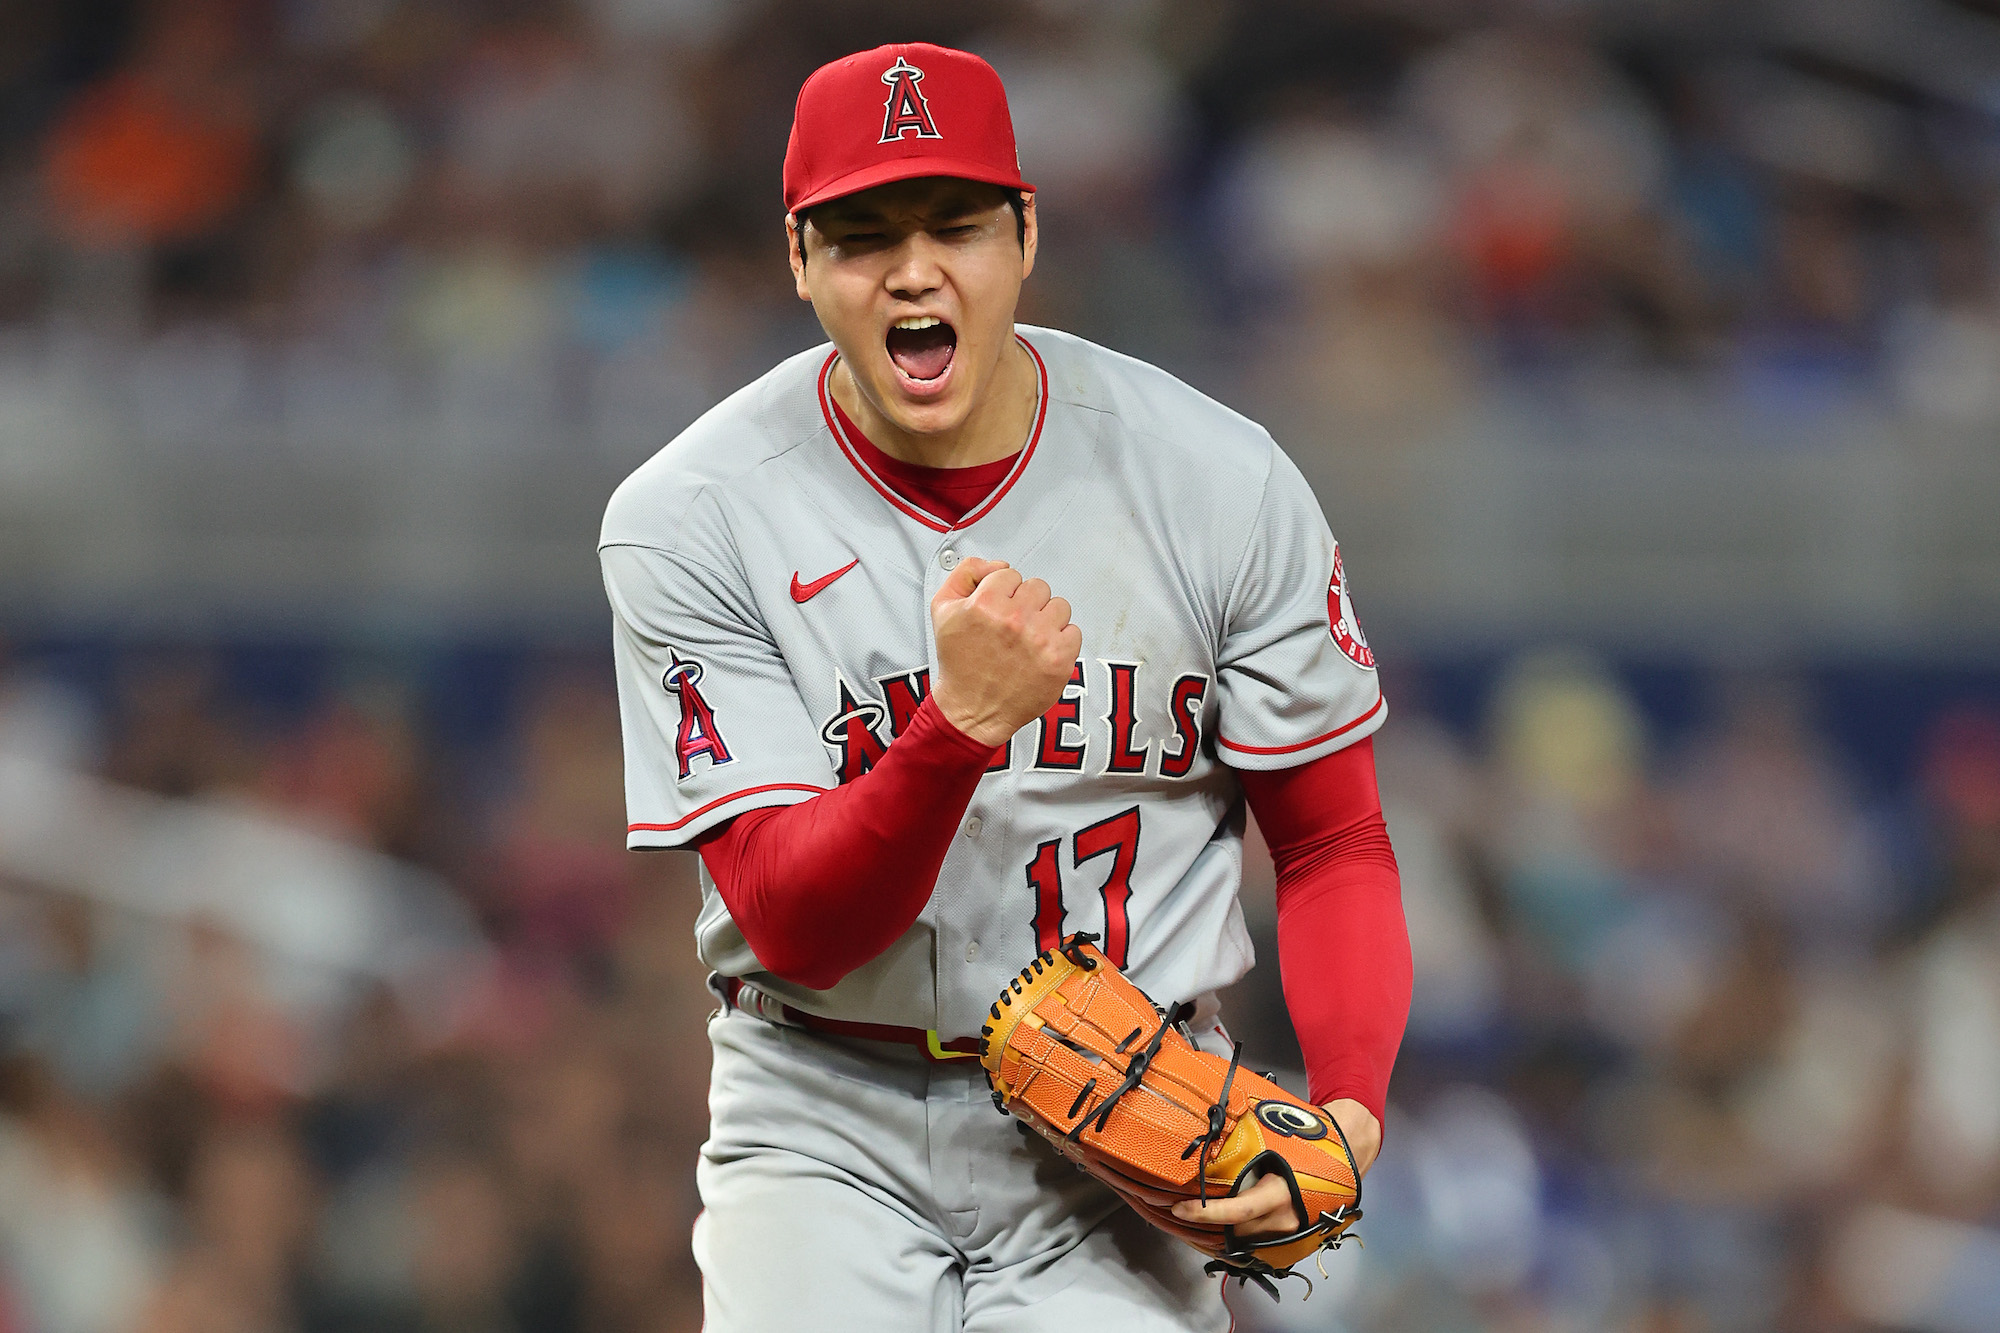 MIAMI, FLORIDA - JULY 06: Shohei Ohtani #17 of the Los Angeles Angels celebrates a strikeout during the seventh inning against the Miami Marlins at loanDepot park on July 06, 2022 in Miami, Florida. (Photo by Michael Reaves/Getty Images)